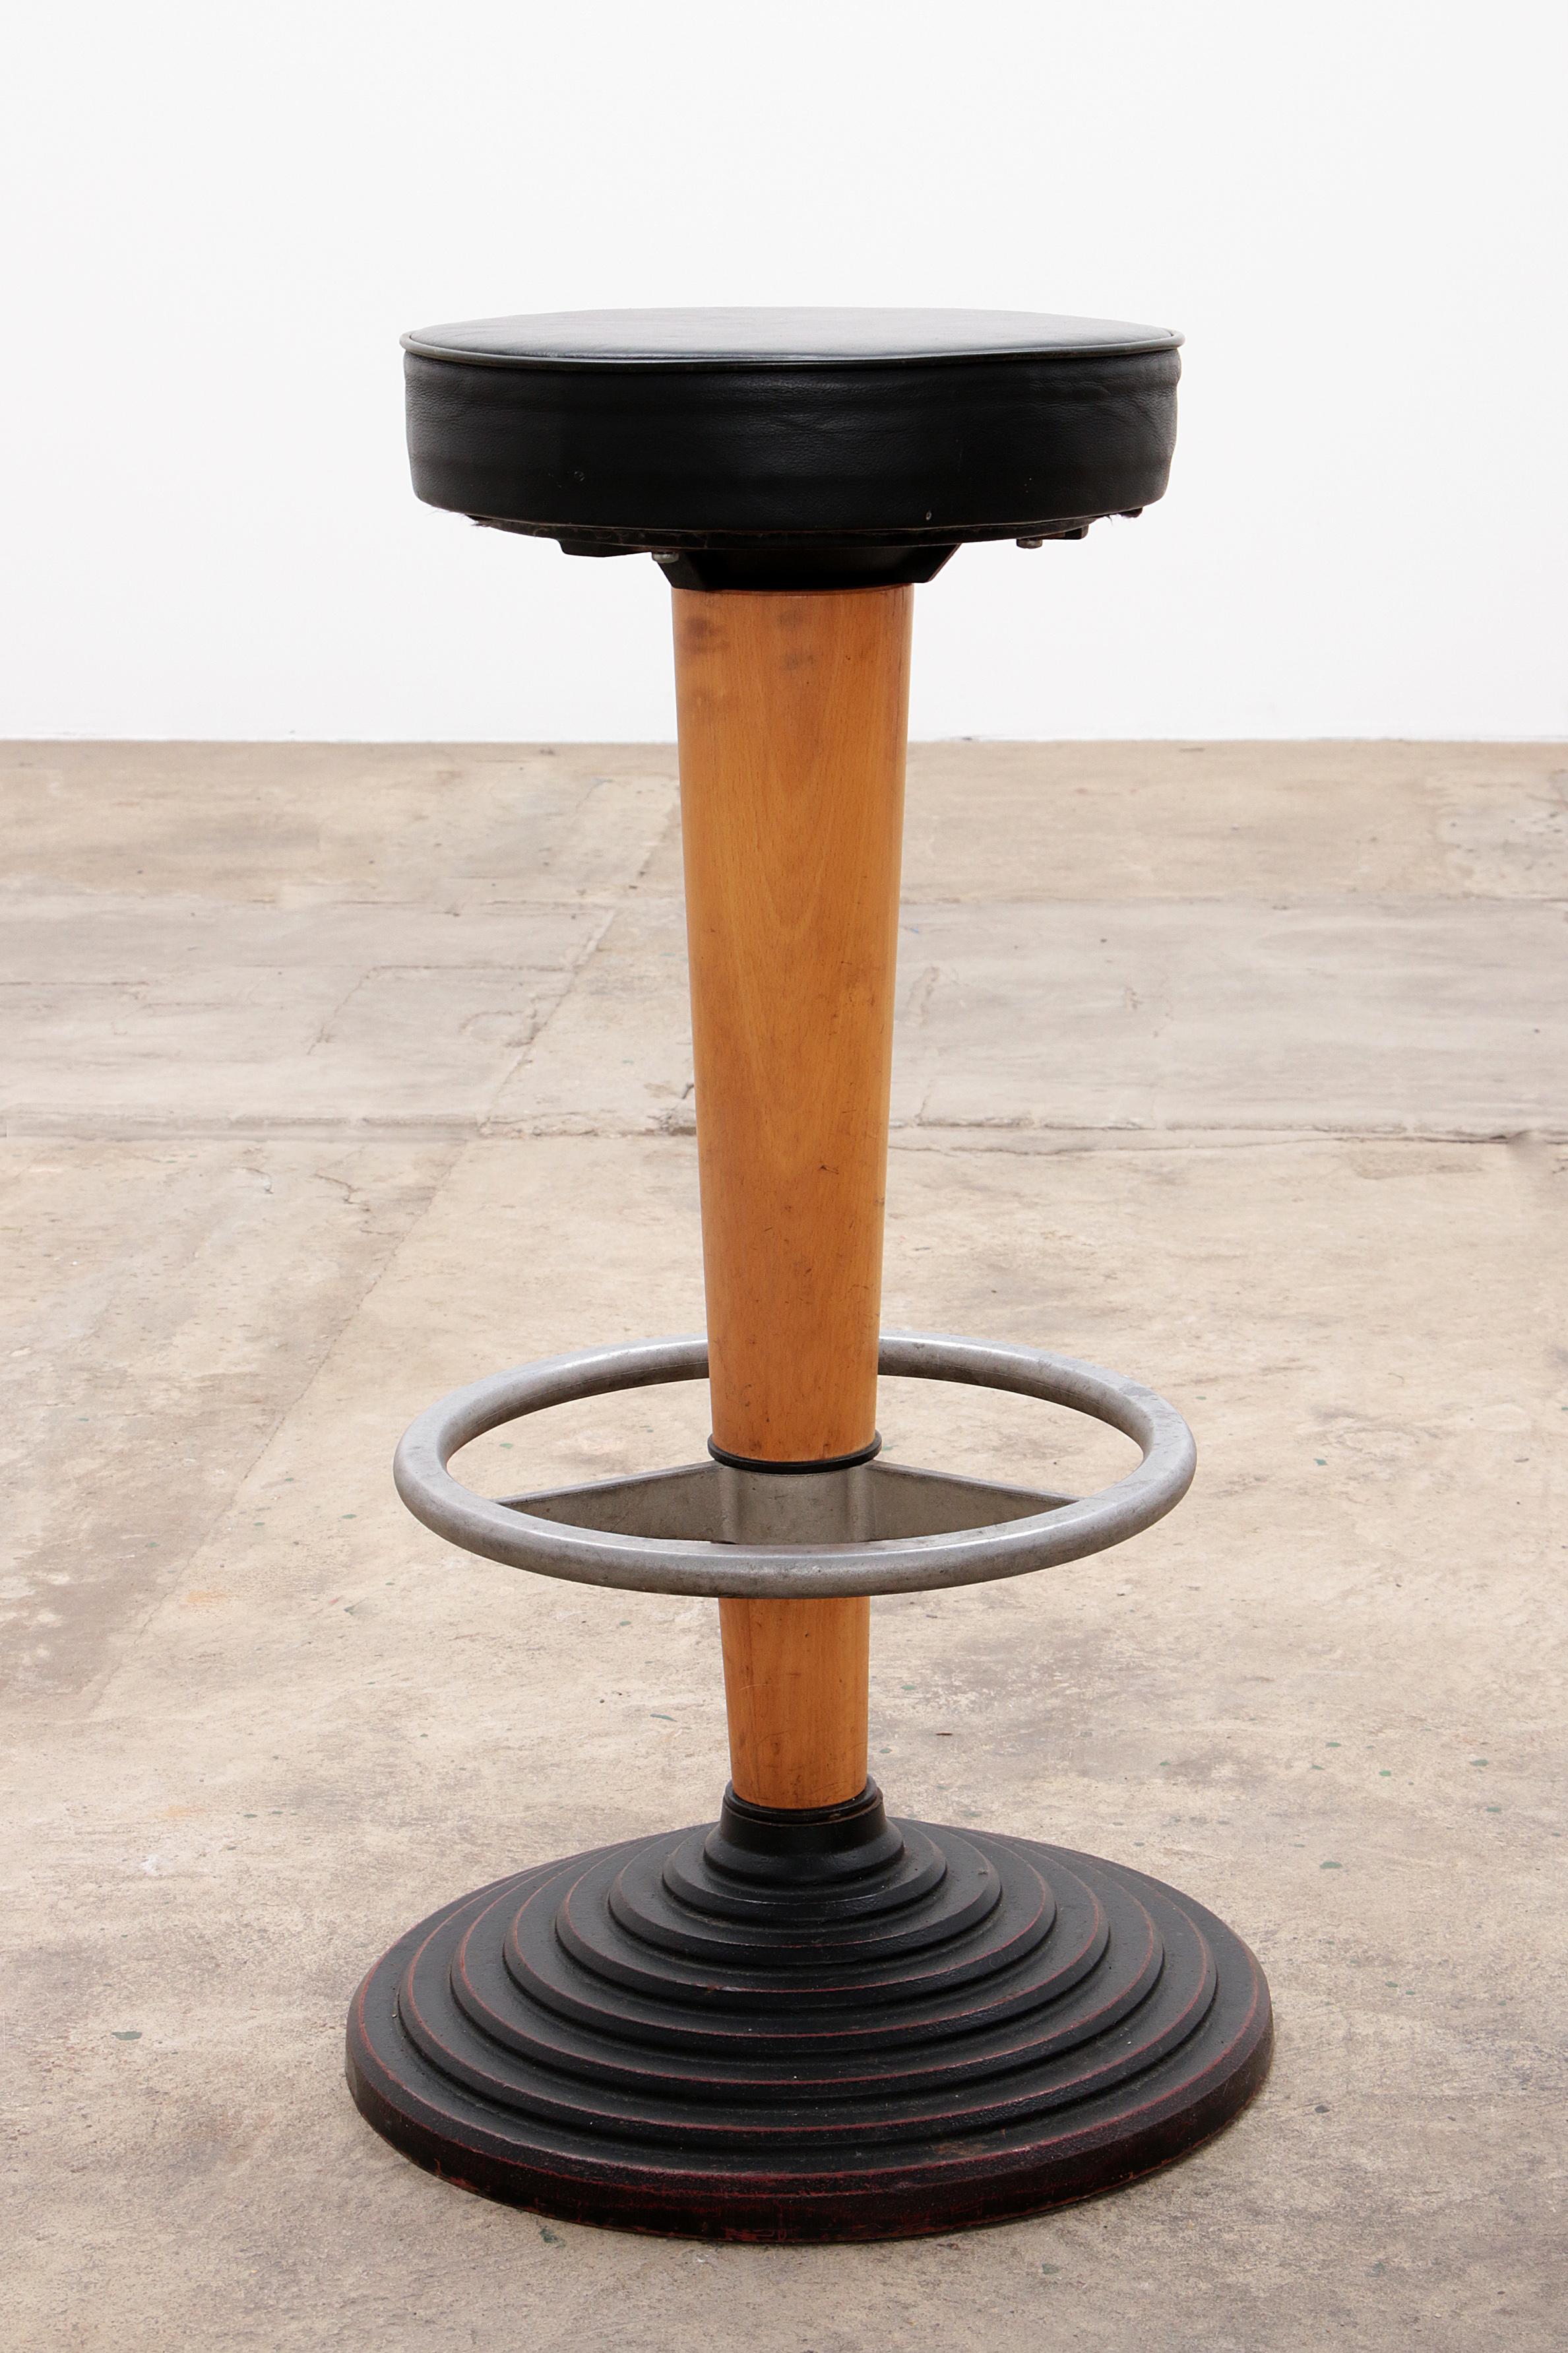 Mid-Century Modern 1960s Bar Stool with Cast Iron Base and Leather Seat, set with 7 bar stools. For Sale